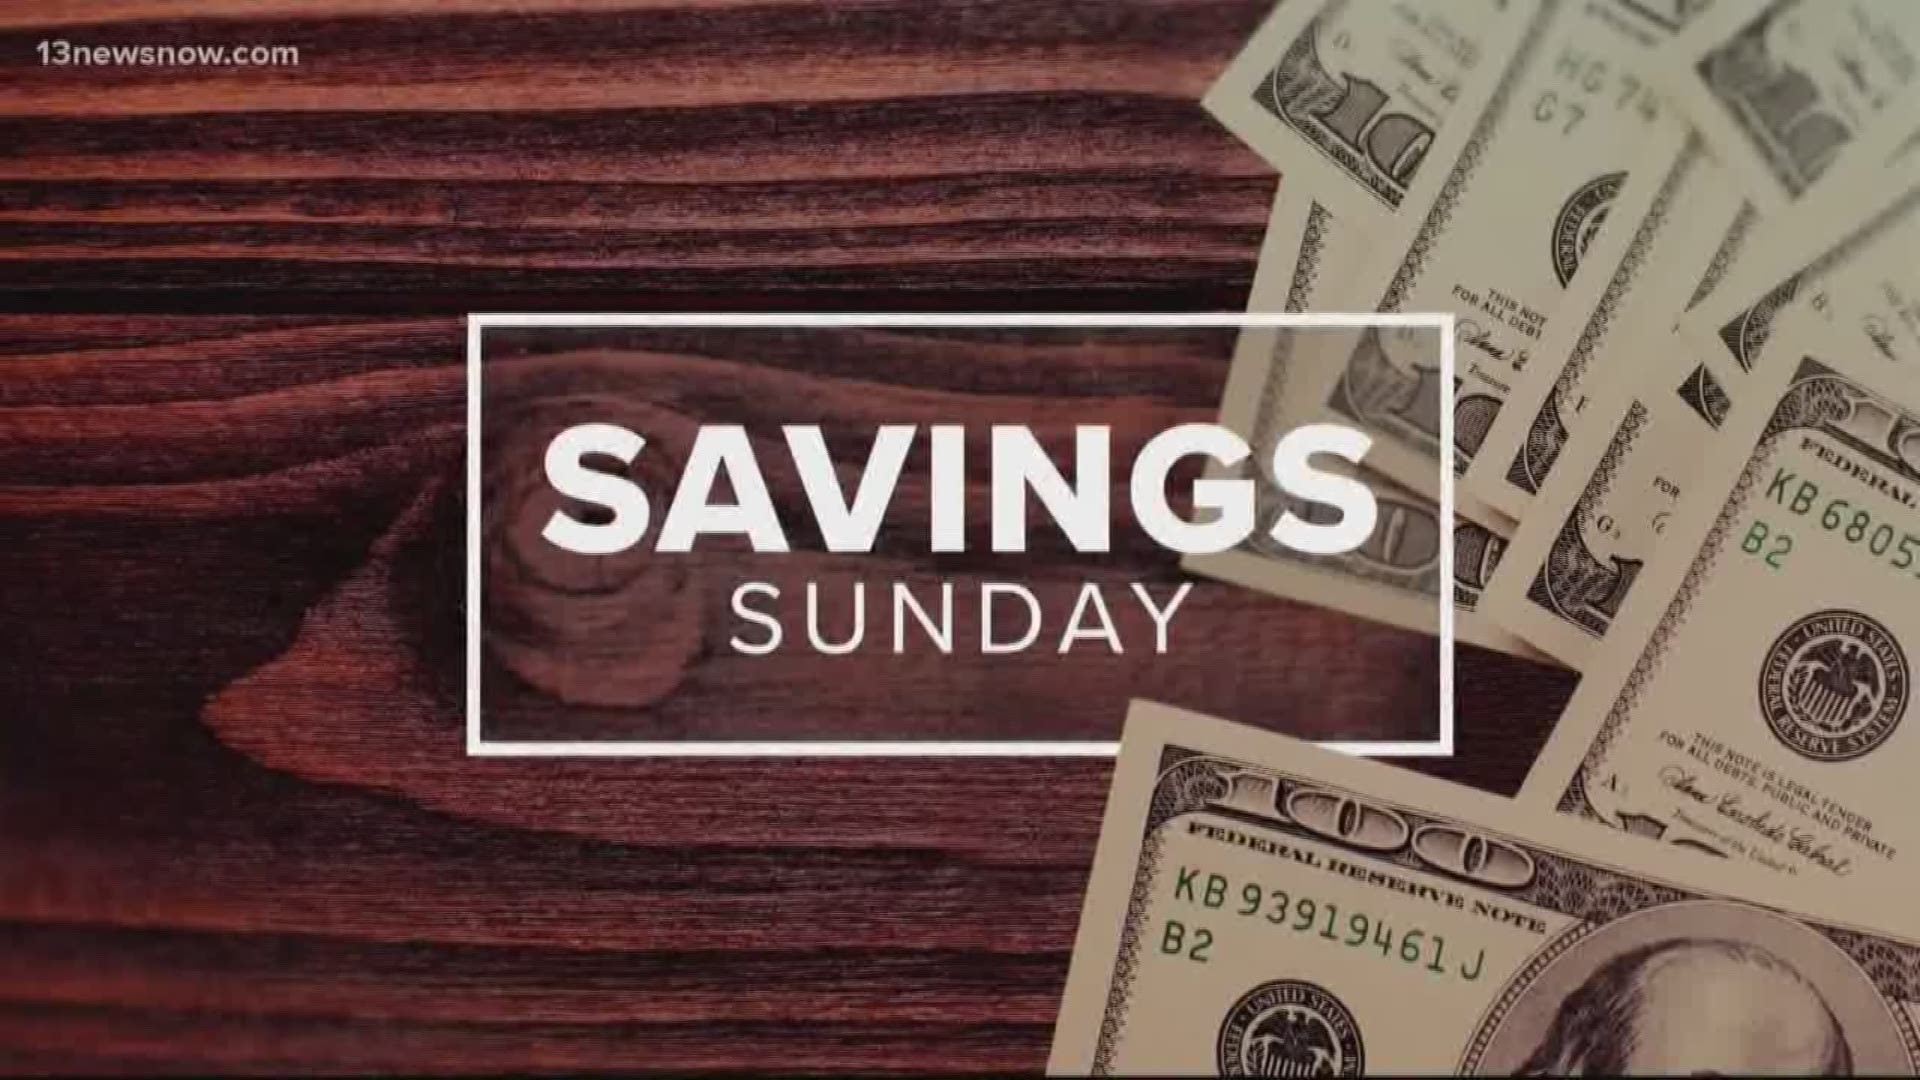 Laura Oliver from www.afrugalchick.com has your big savings for the week of February 2, 2020.